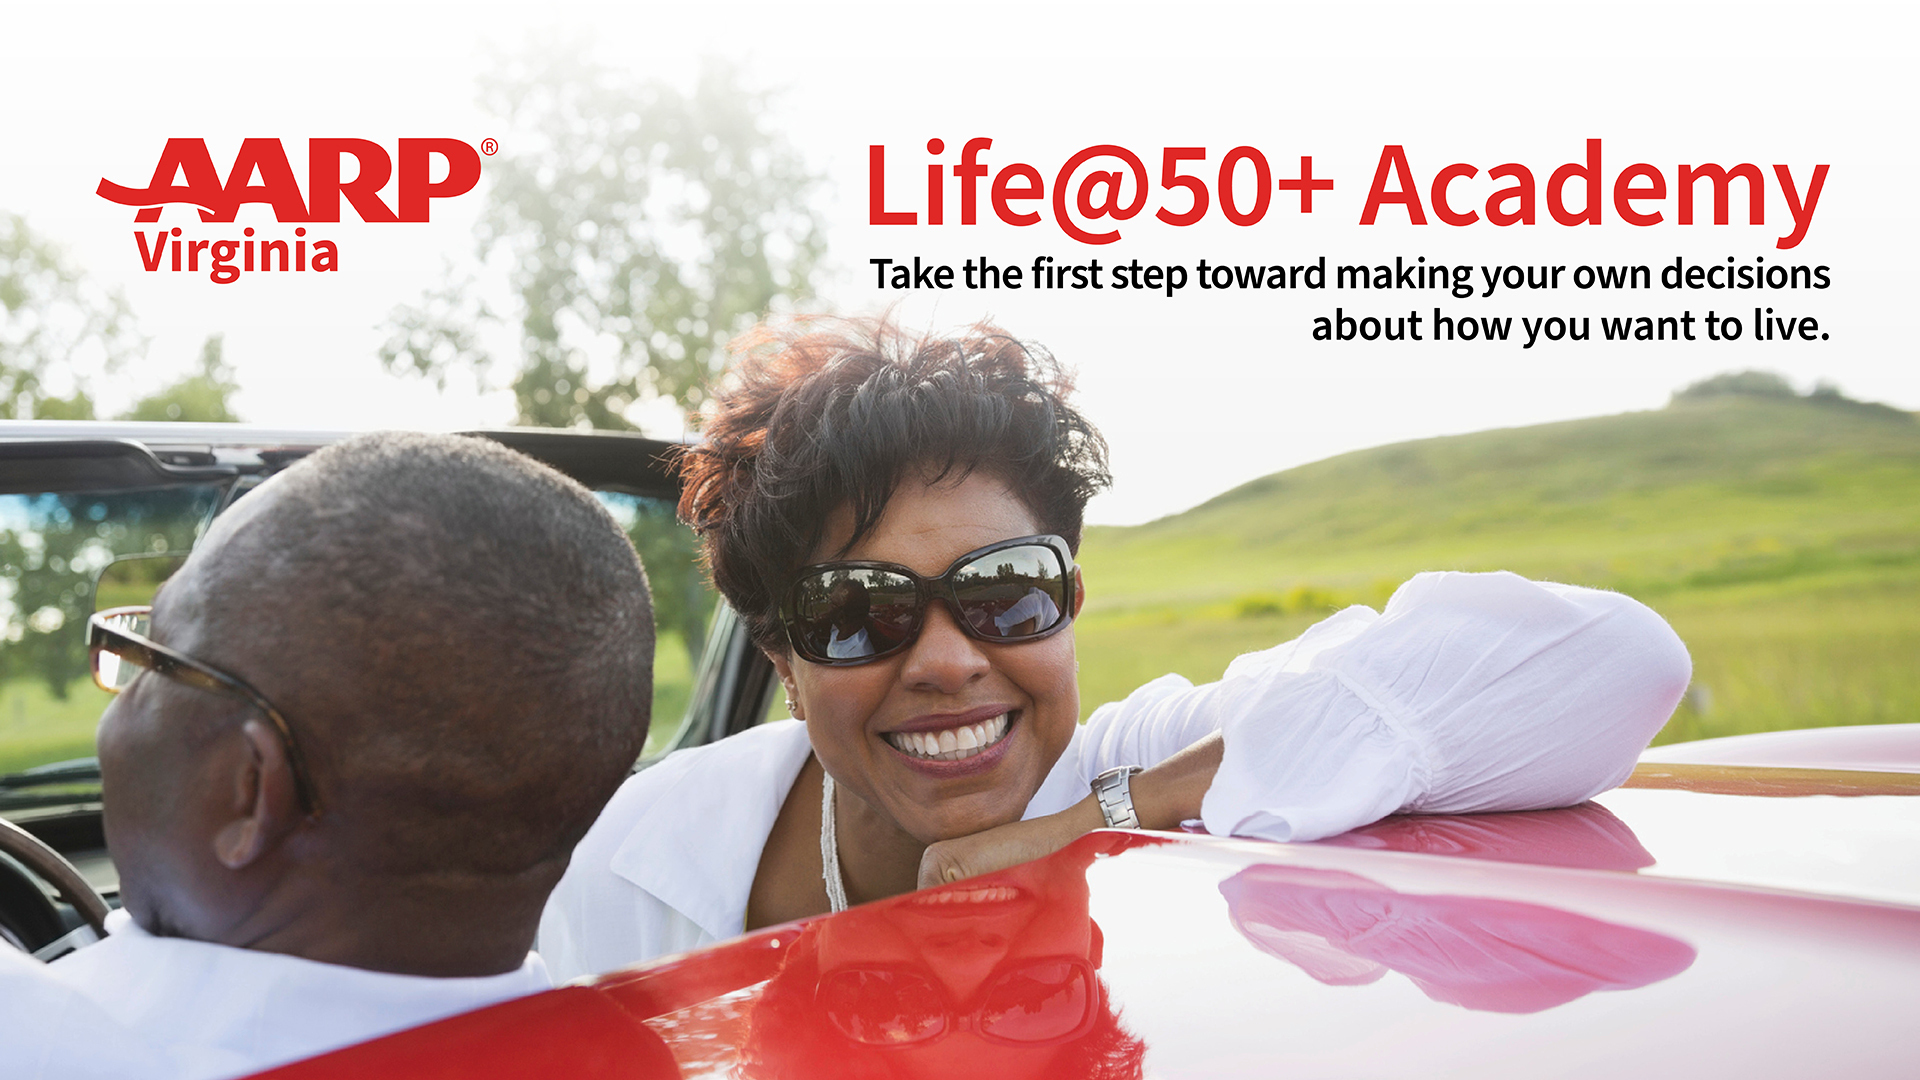 Life@50+ Academy: Planning for Your Health, Wealth, and Happiness - April 27 - Vienna, Vienna, Virginia, United States